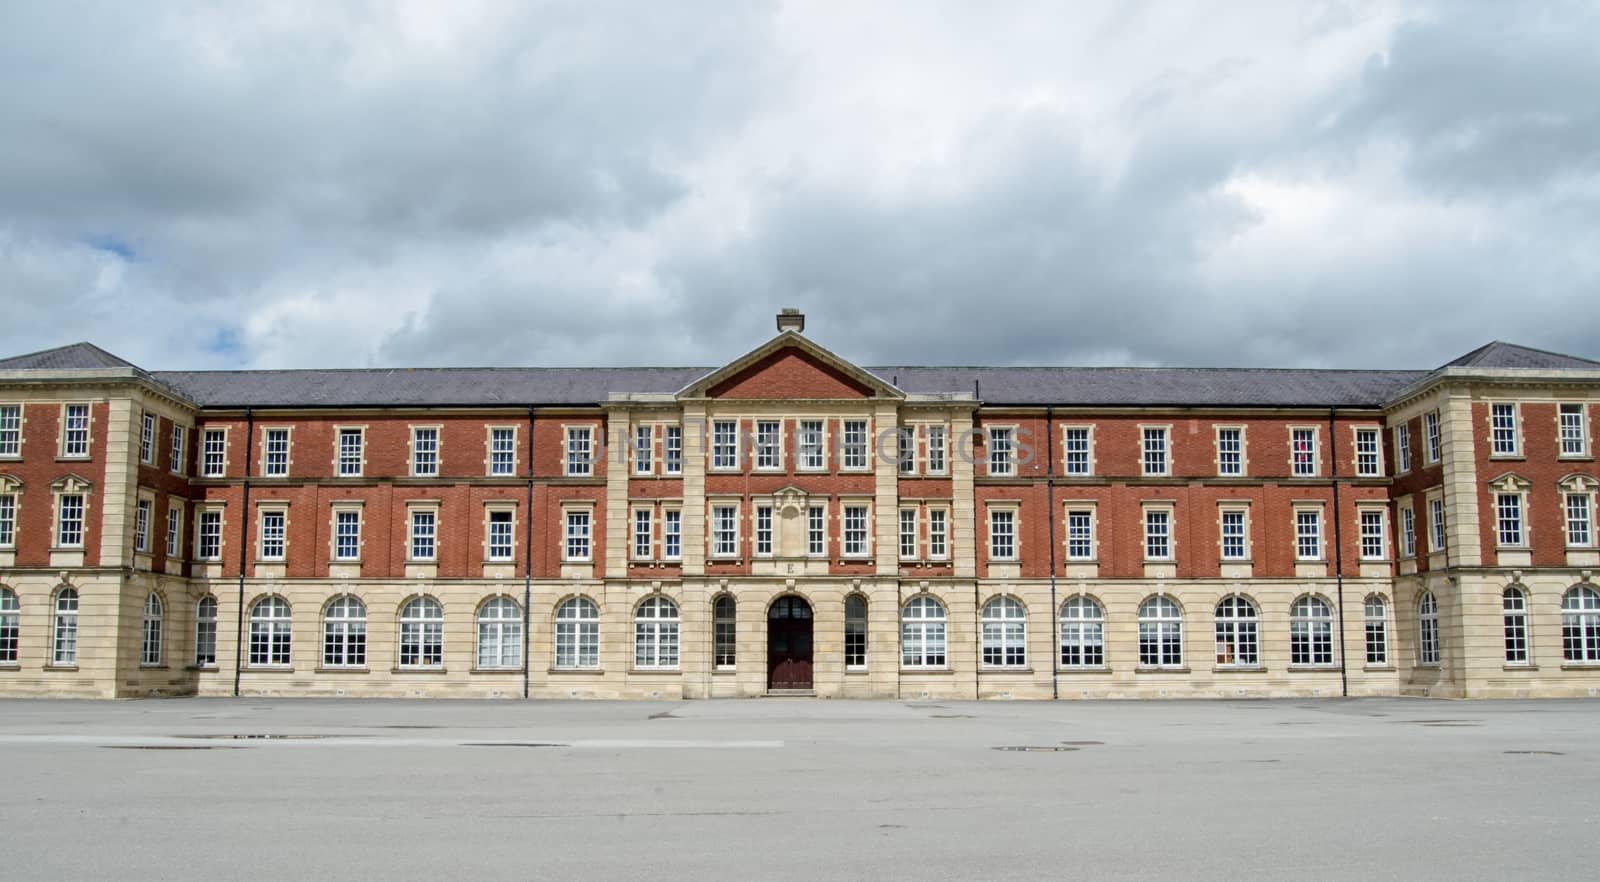 E Block of the Victorian New College Buildings at the Royal Military Academy in Sandhurst, Berkshire.  Officers are trained here for the British Army.